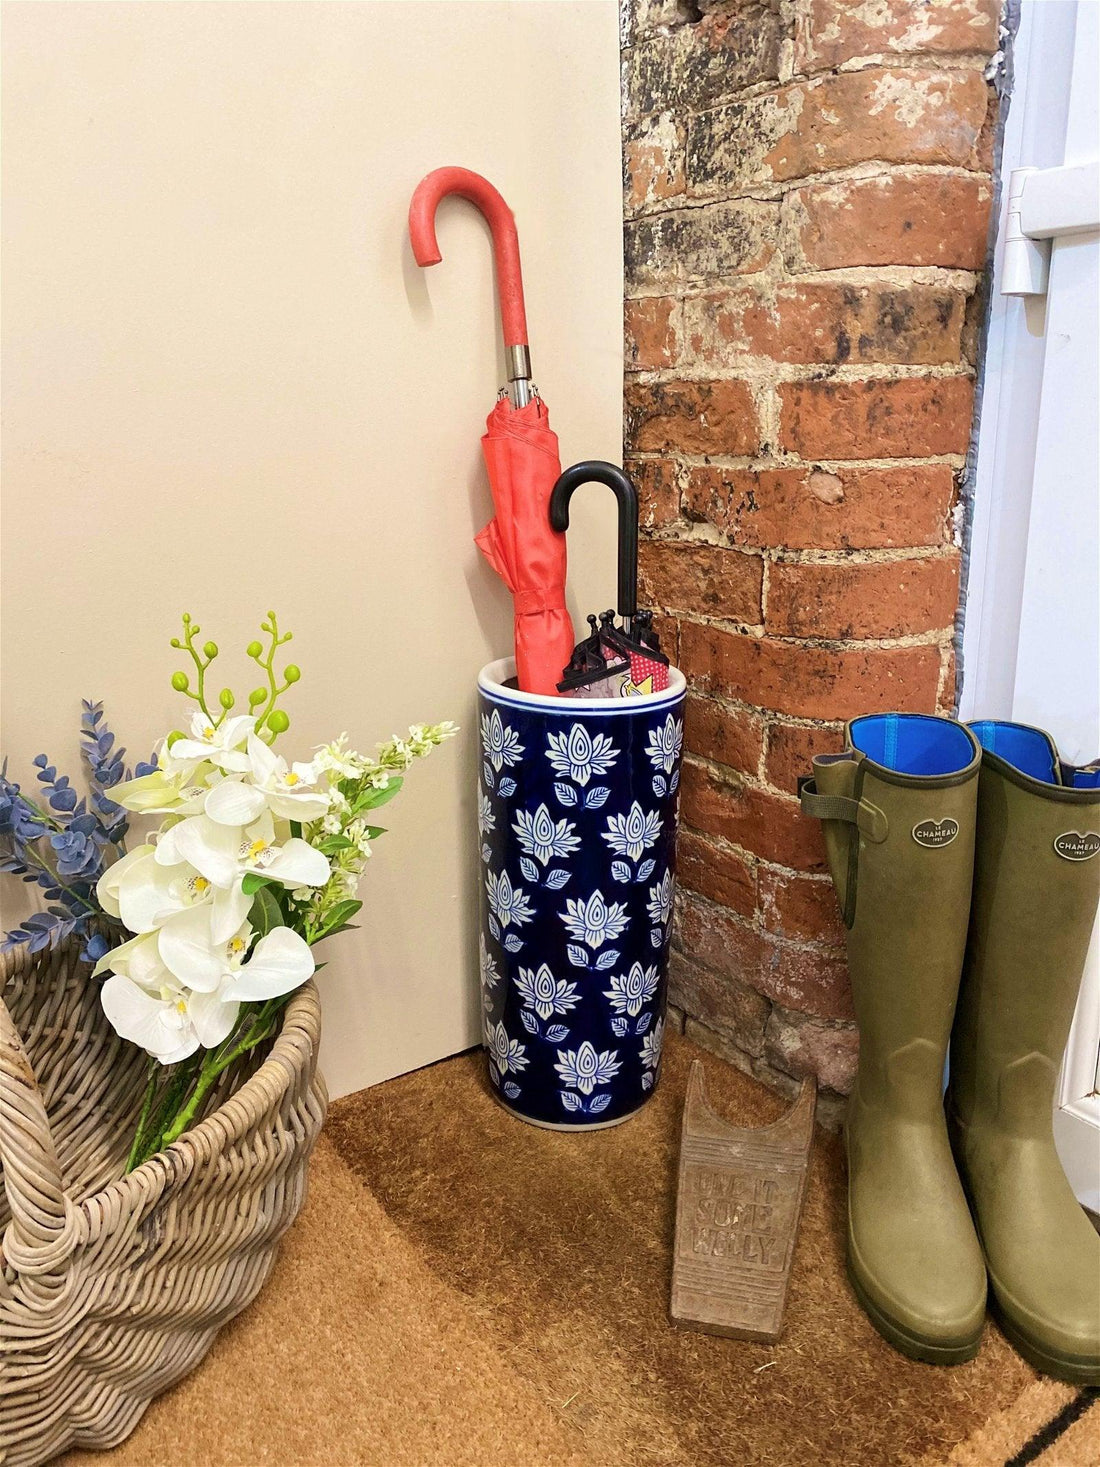 Blue With White Flower Umbrella Stand - £59.99 - 